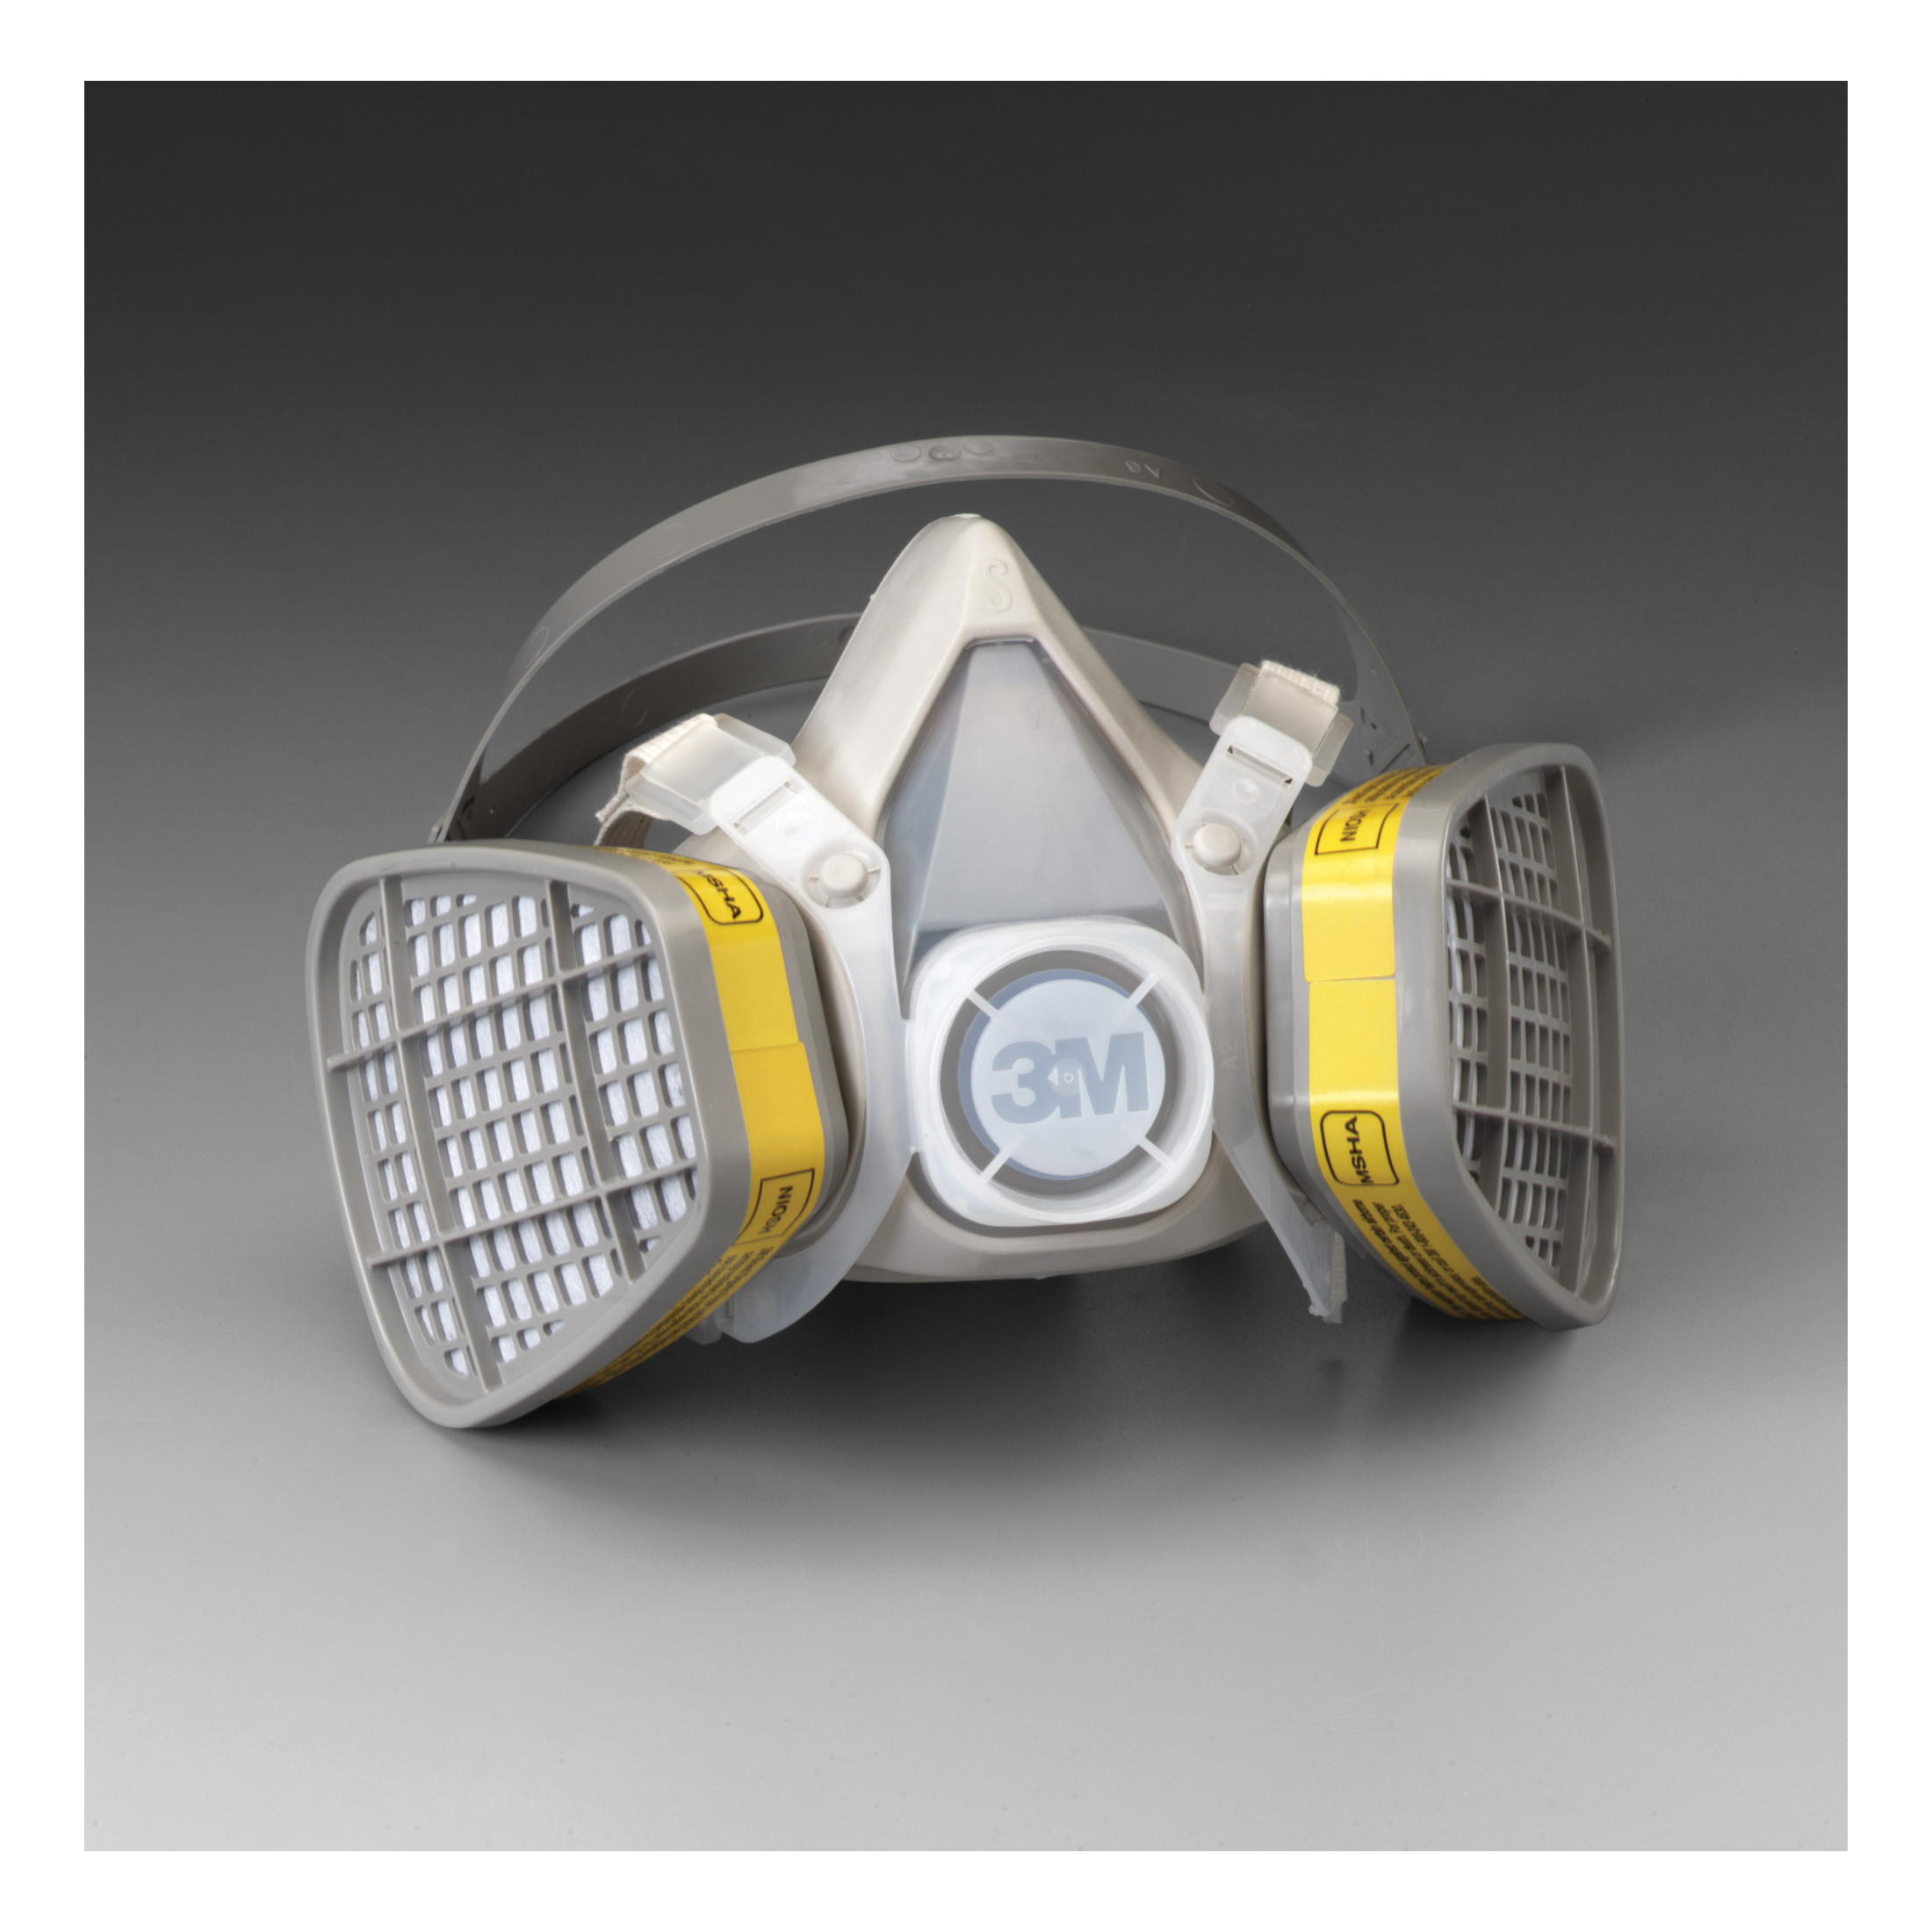 3M™ VFlex™ 051131-17397 Economical Flat Fold Disposable Particulate Respirator, Standard, Resists: Non-Oil Based Particles, Airborne Contaminants, Dust and Other Particles